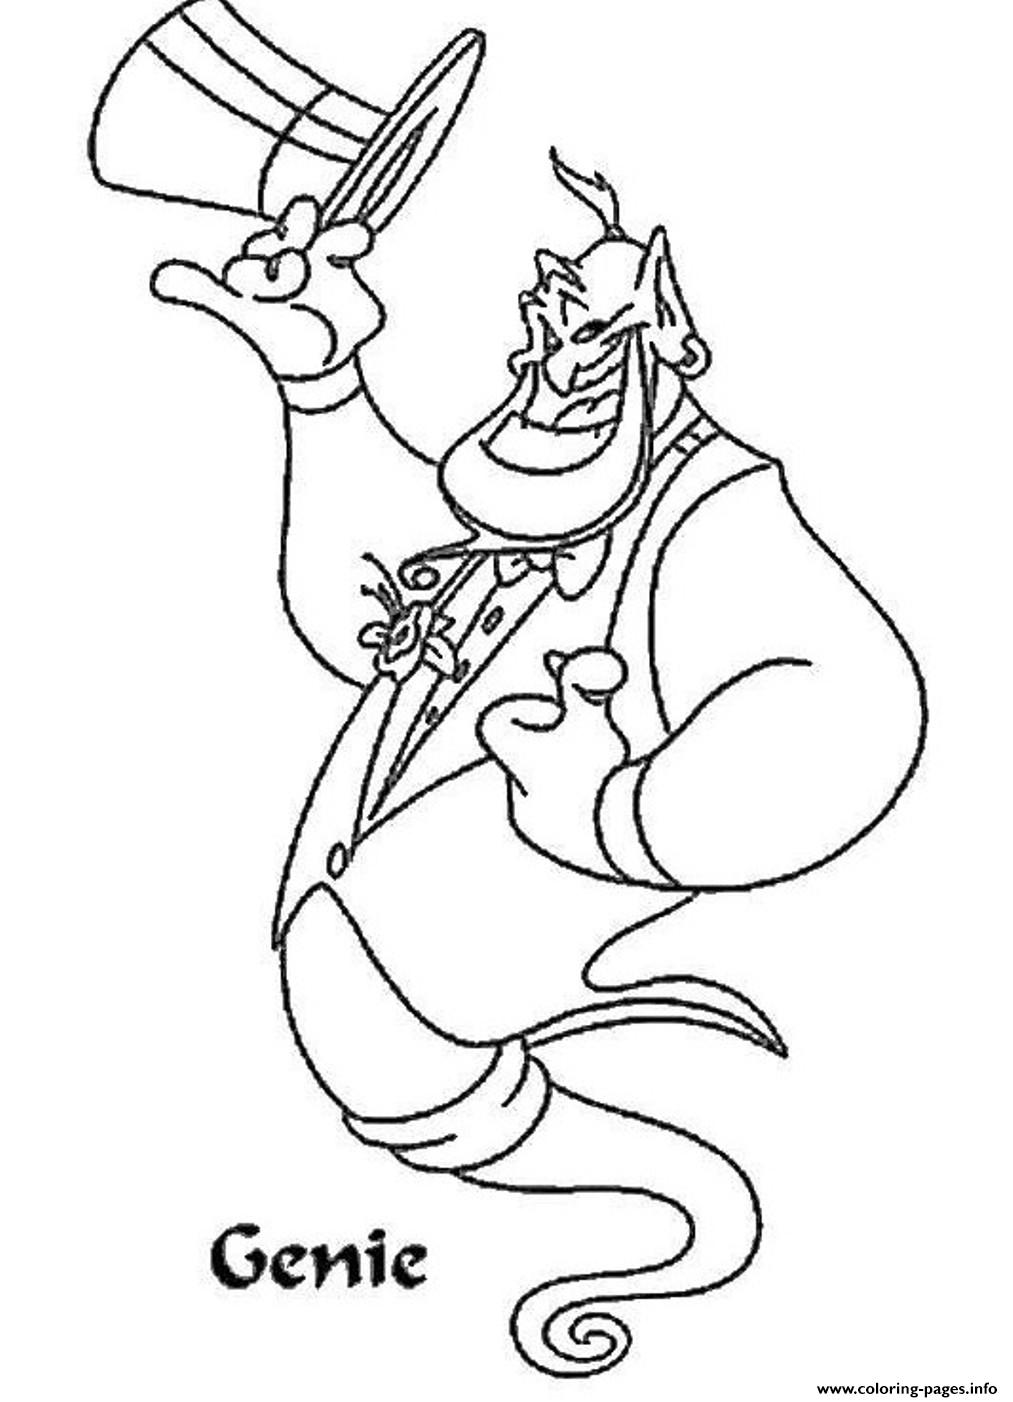 Aladdin Printable Coloring Pages aladdin s genie584b coloring ...